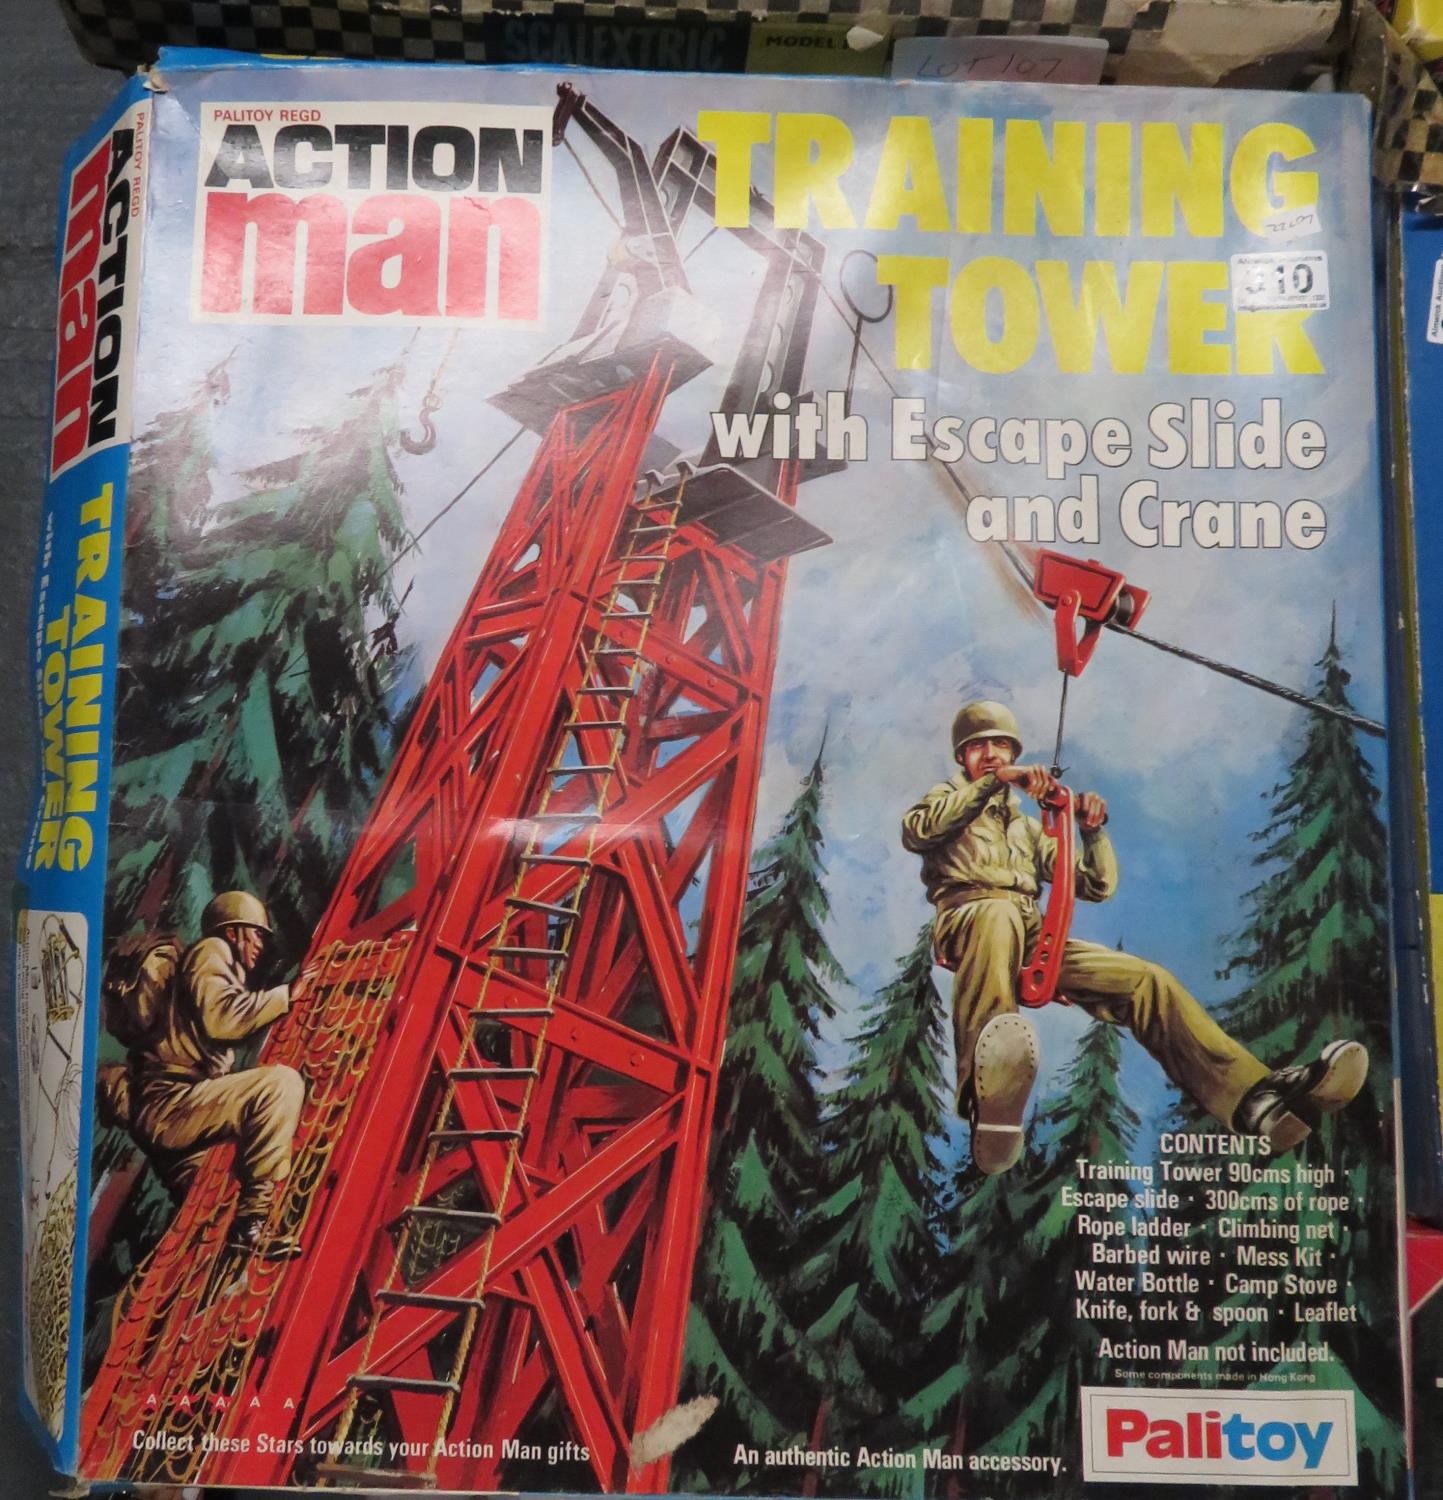 Palitoy Action Man Training Tower in box